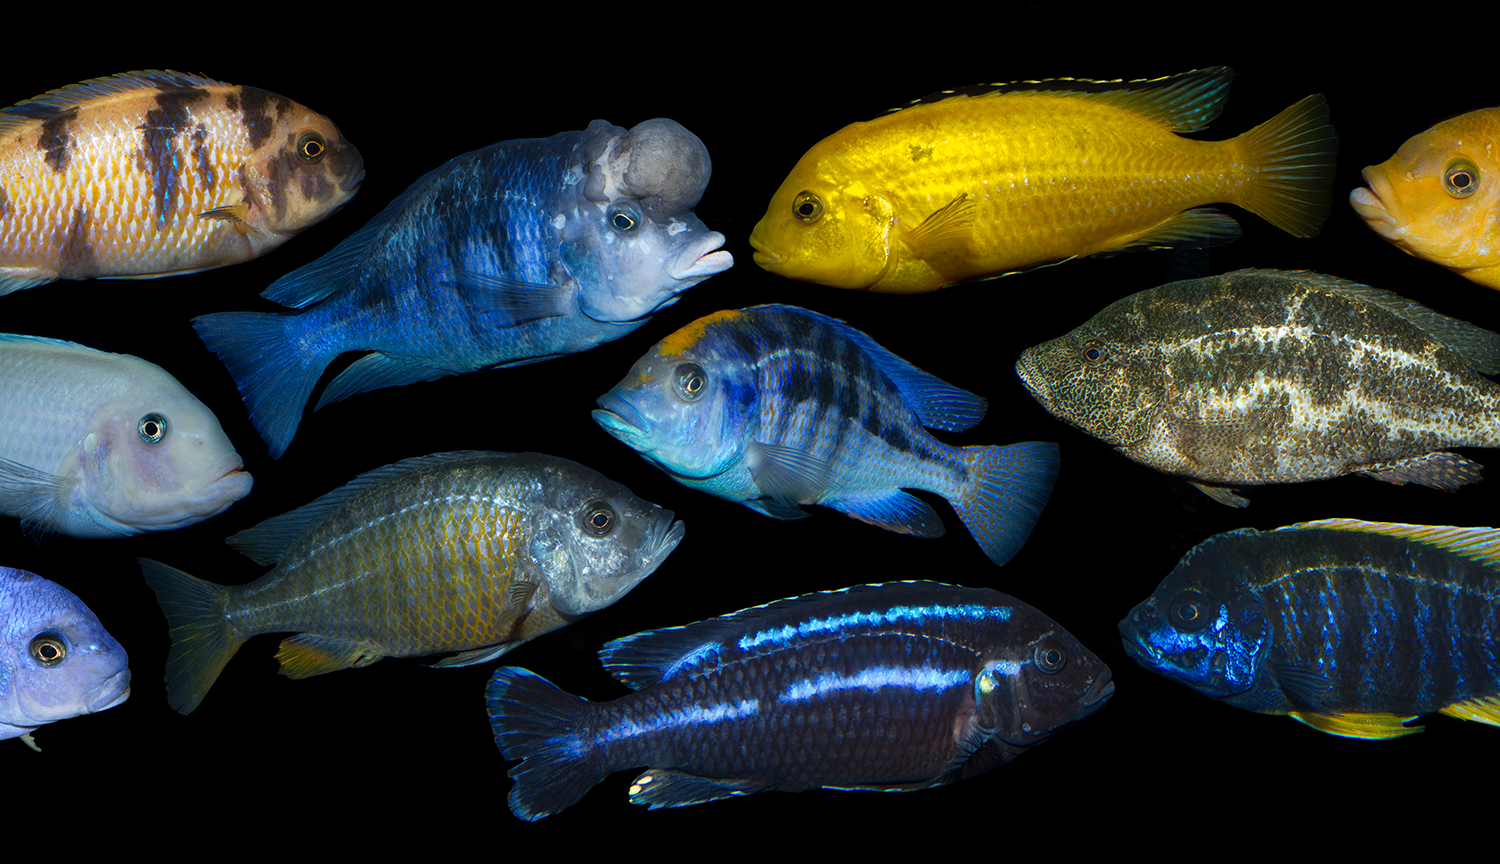 A collage of photographs of cichlid fishes of different colors and patterns, including blue and yellow, stripy and splotchy.